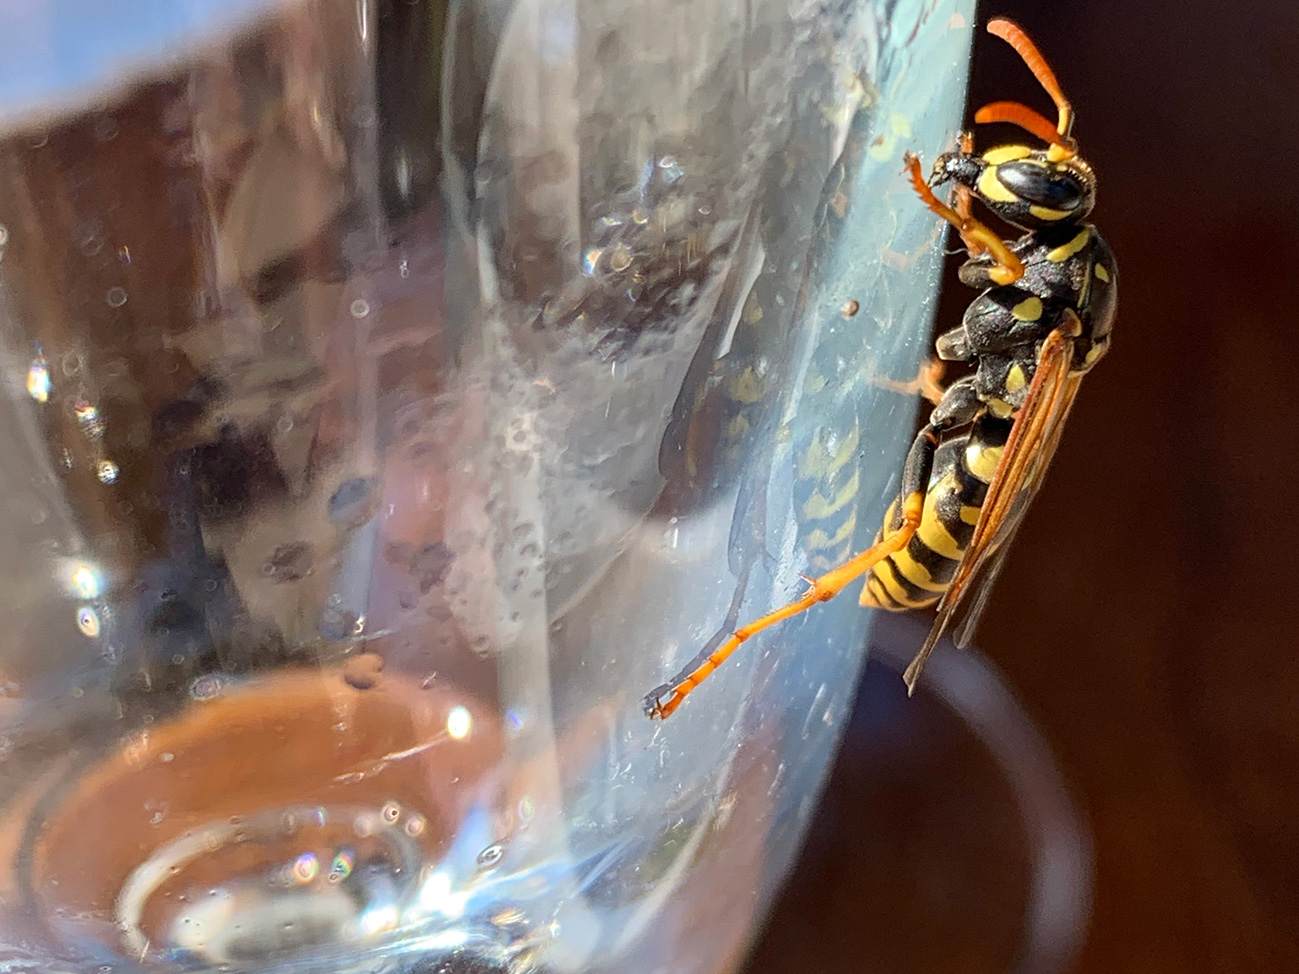 Wasp on beer glass